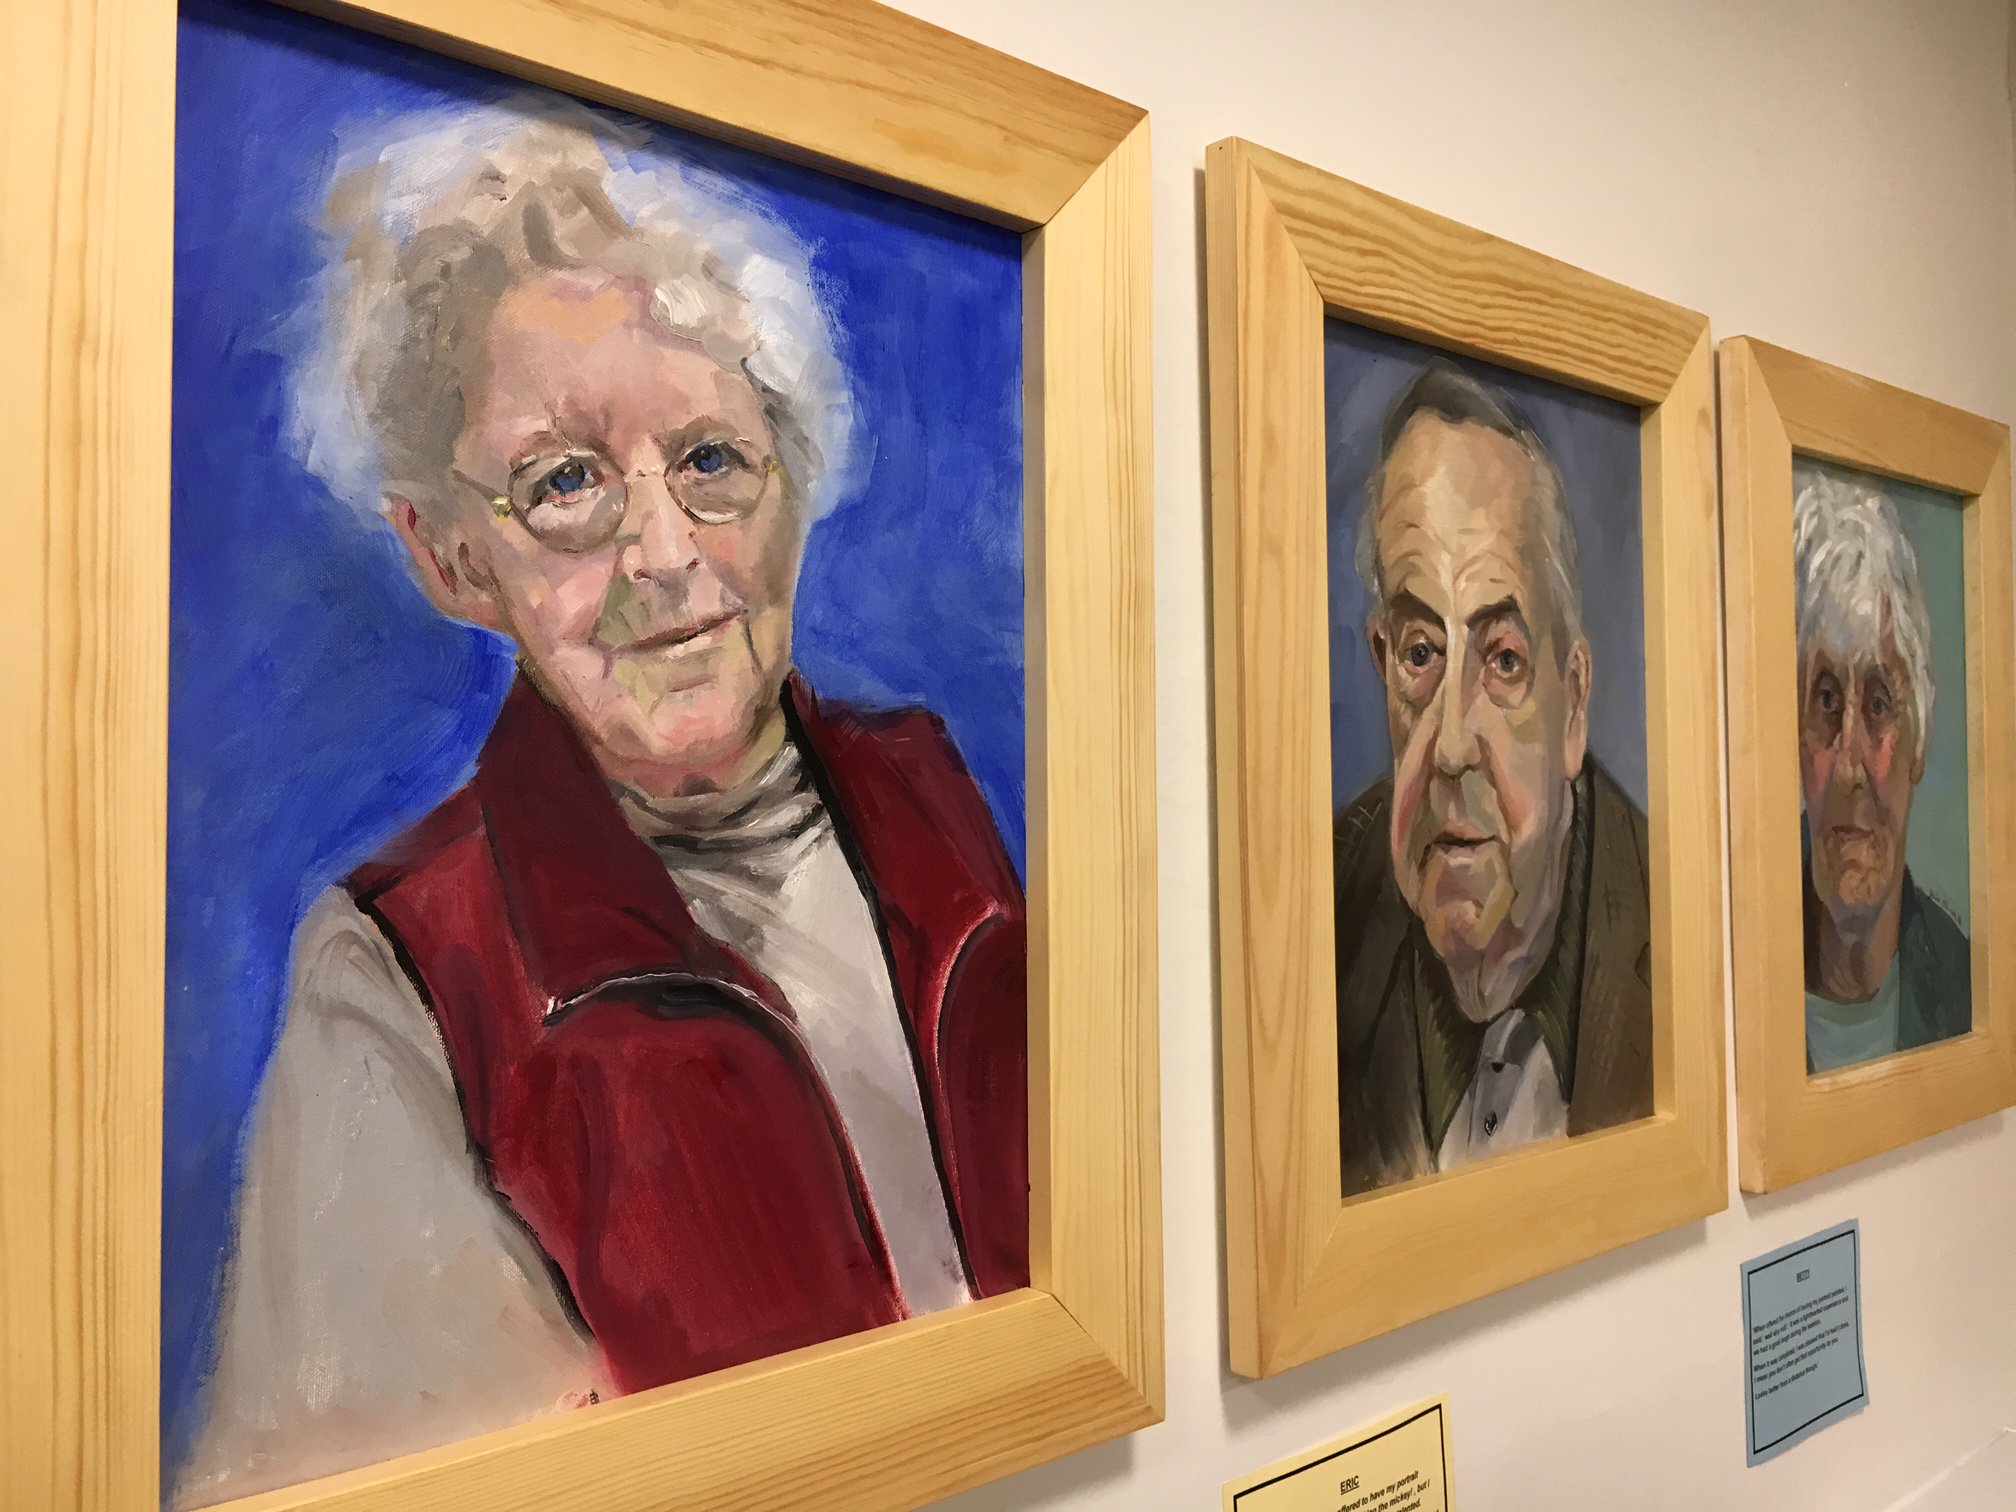 INTERNATIONAL ARTIST COMPLETES LATEST PROJECT WITH HELP FROM LOCAL HOSPICE featured image